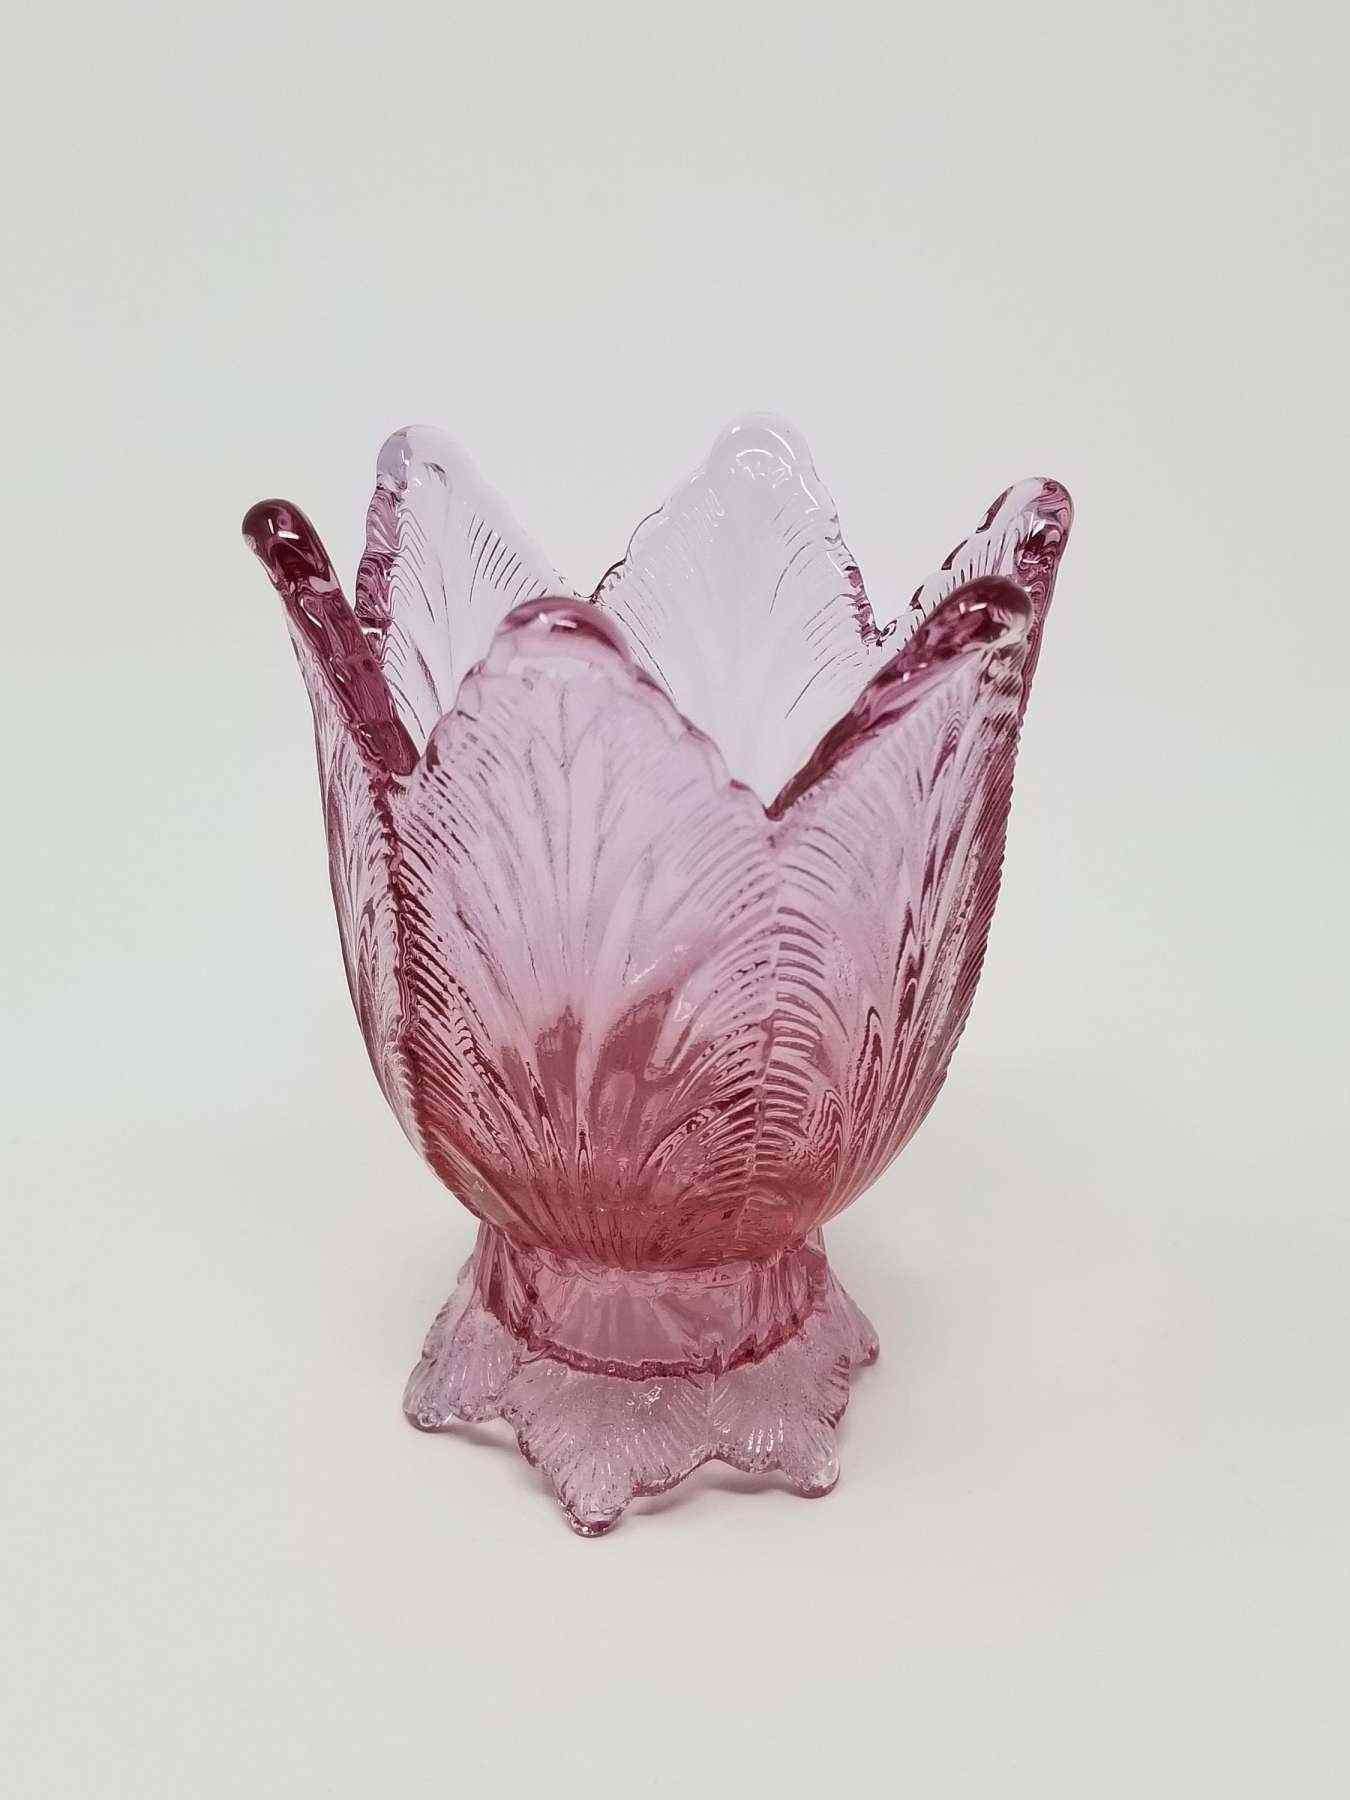 24 Stylish Waterford Giftology Sugar Bud Vase 2022 free download waterford giftology sugar bud vase of waterford crystal bud vase inspirational clear glass votive candle intended for waterford crystal bud vase inspirational clear glass votive candle holde